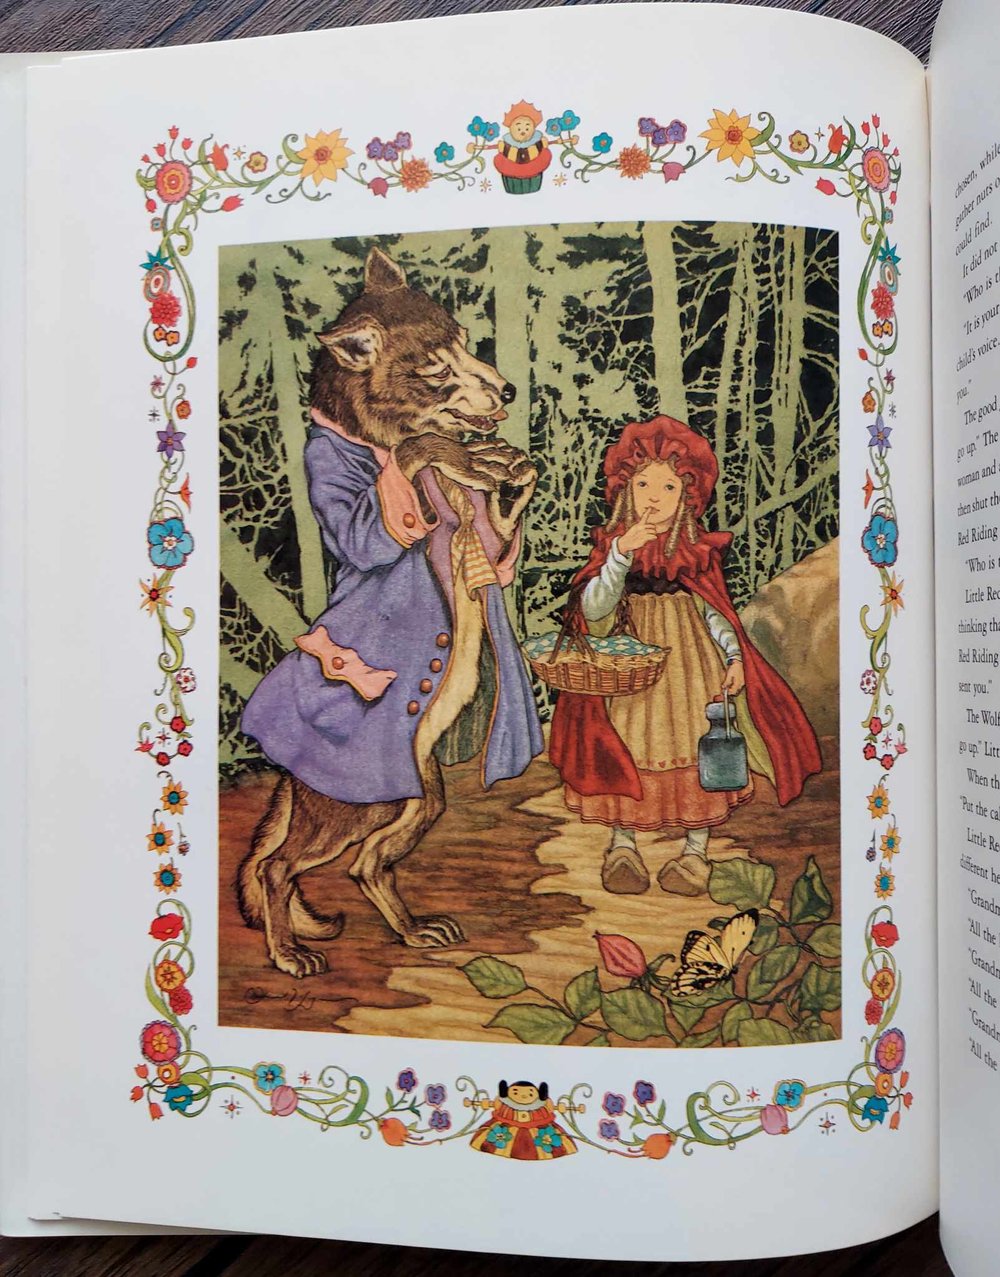 Cinderella and Other Tales from Perrault, illustrated by Michael Hague